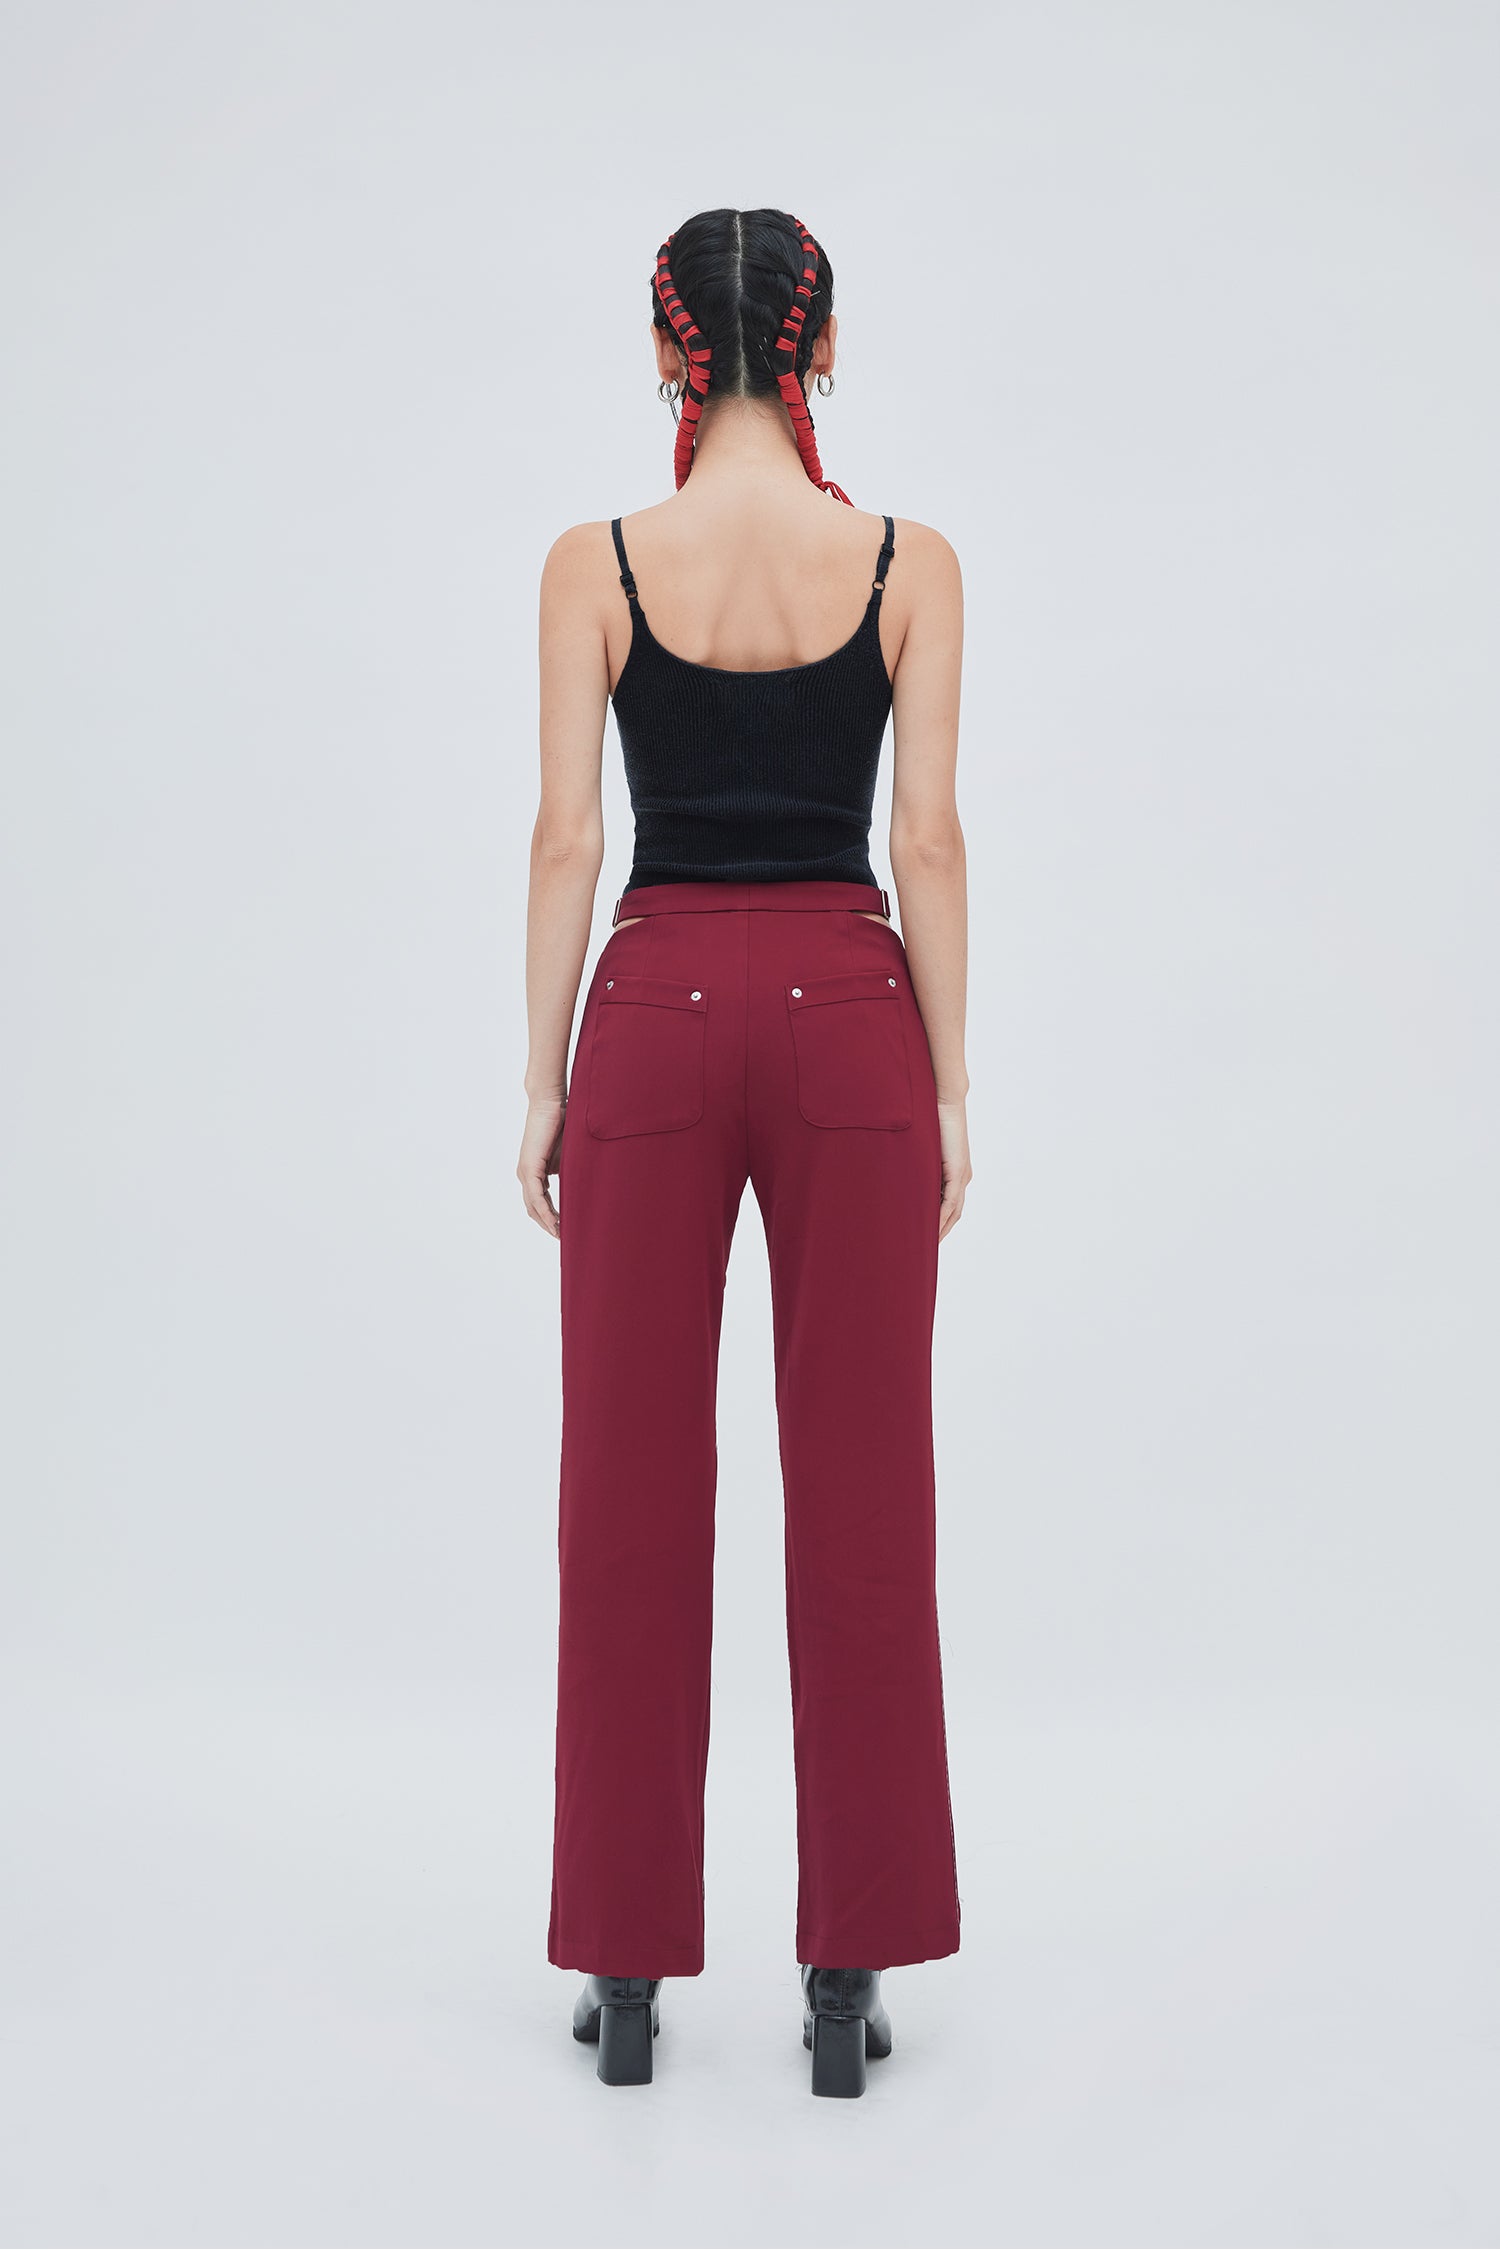 Deadstock 70s vintage Lee corduroy trousers 31 X 36 deep red soft cord,  rare with original tags - St Cyr Vintage